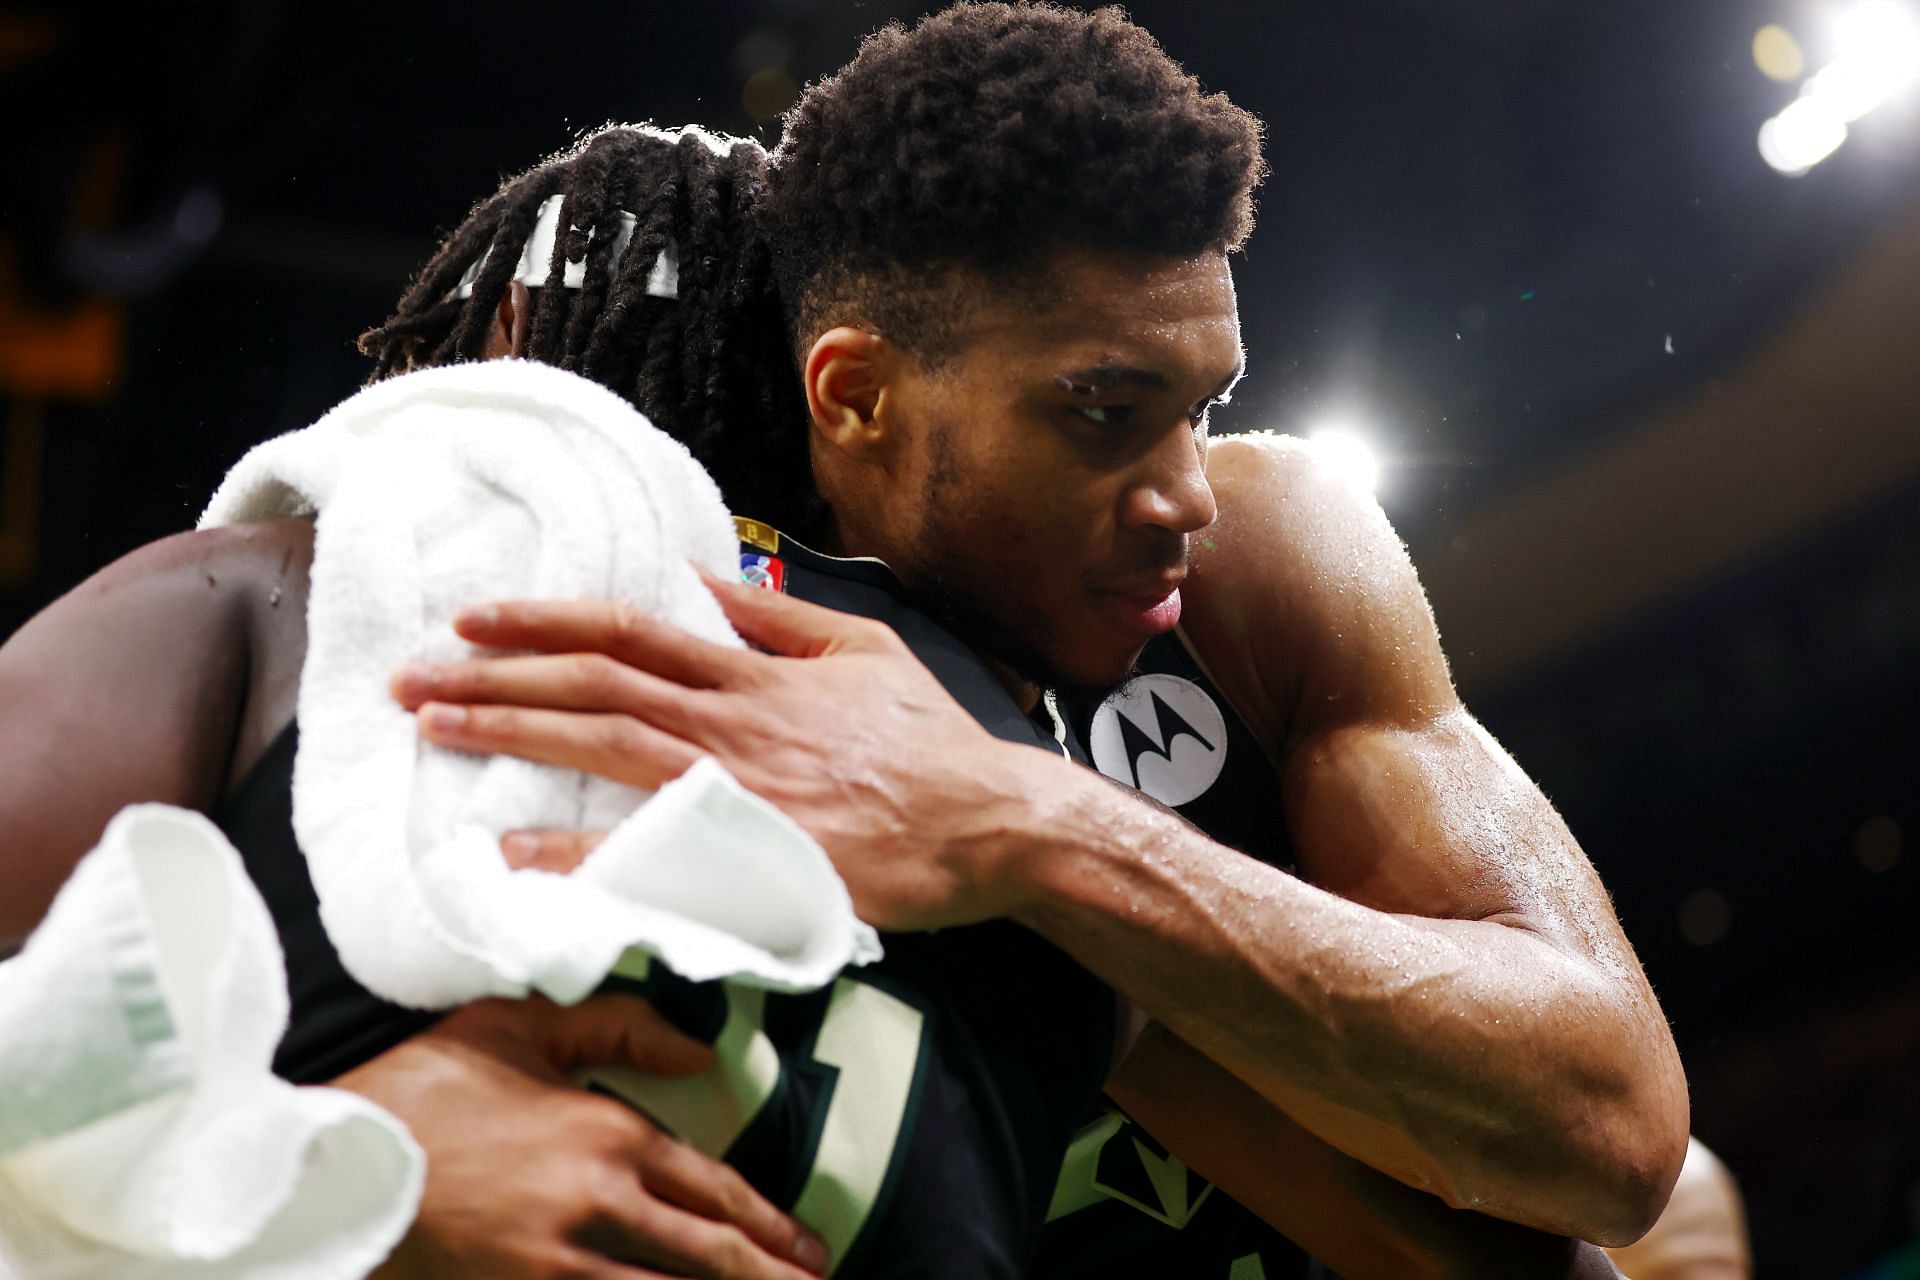 Giannis Antetokounmpo #34 hugs Jrue Holiday #21 of the Milwaukee Bucks after being defeated by the Boston Celtics 109-81 in Game Seven of the 2022 NBA Playoffs Eastern Conference Semifinals at TD Garden on May 15, 2022 in Boston, Massachusetts